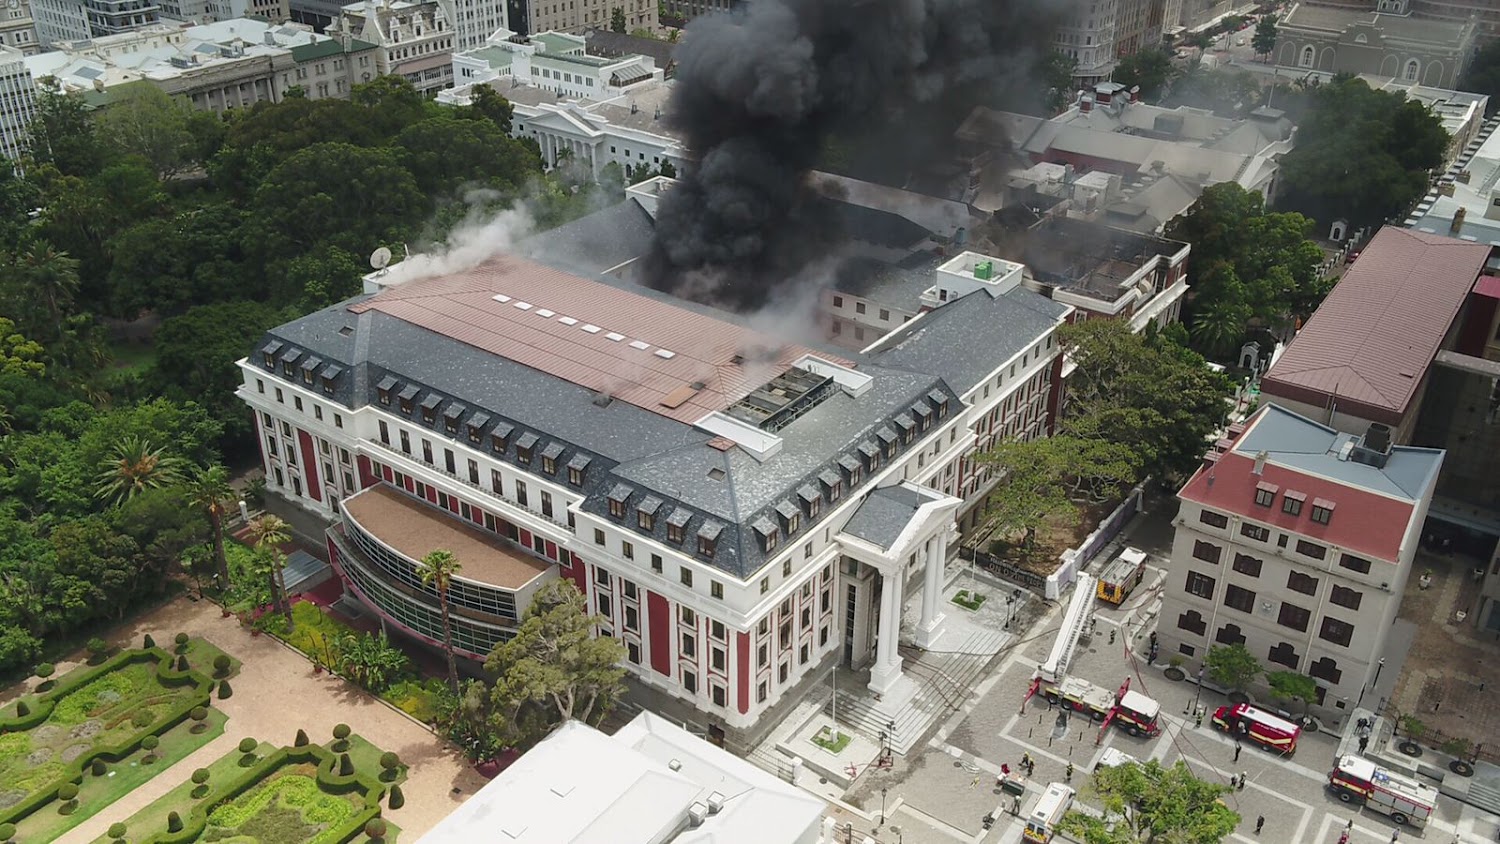 S. Africa’s National Assembly “extensively destroyed” by fire: official